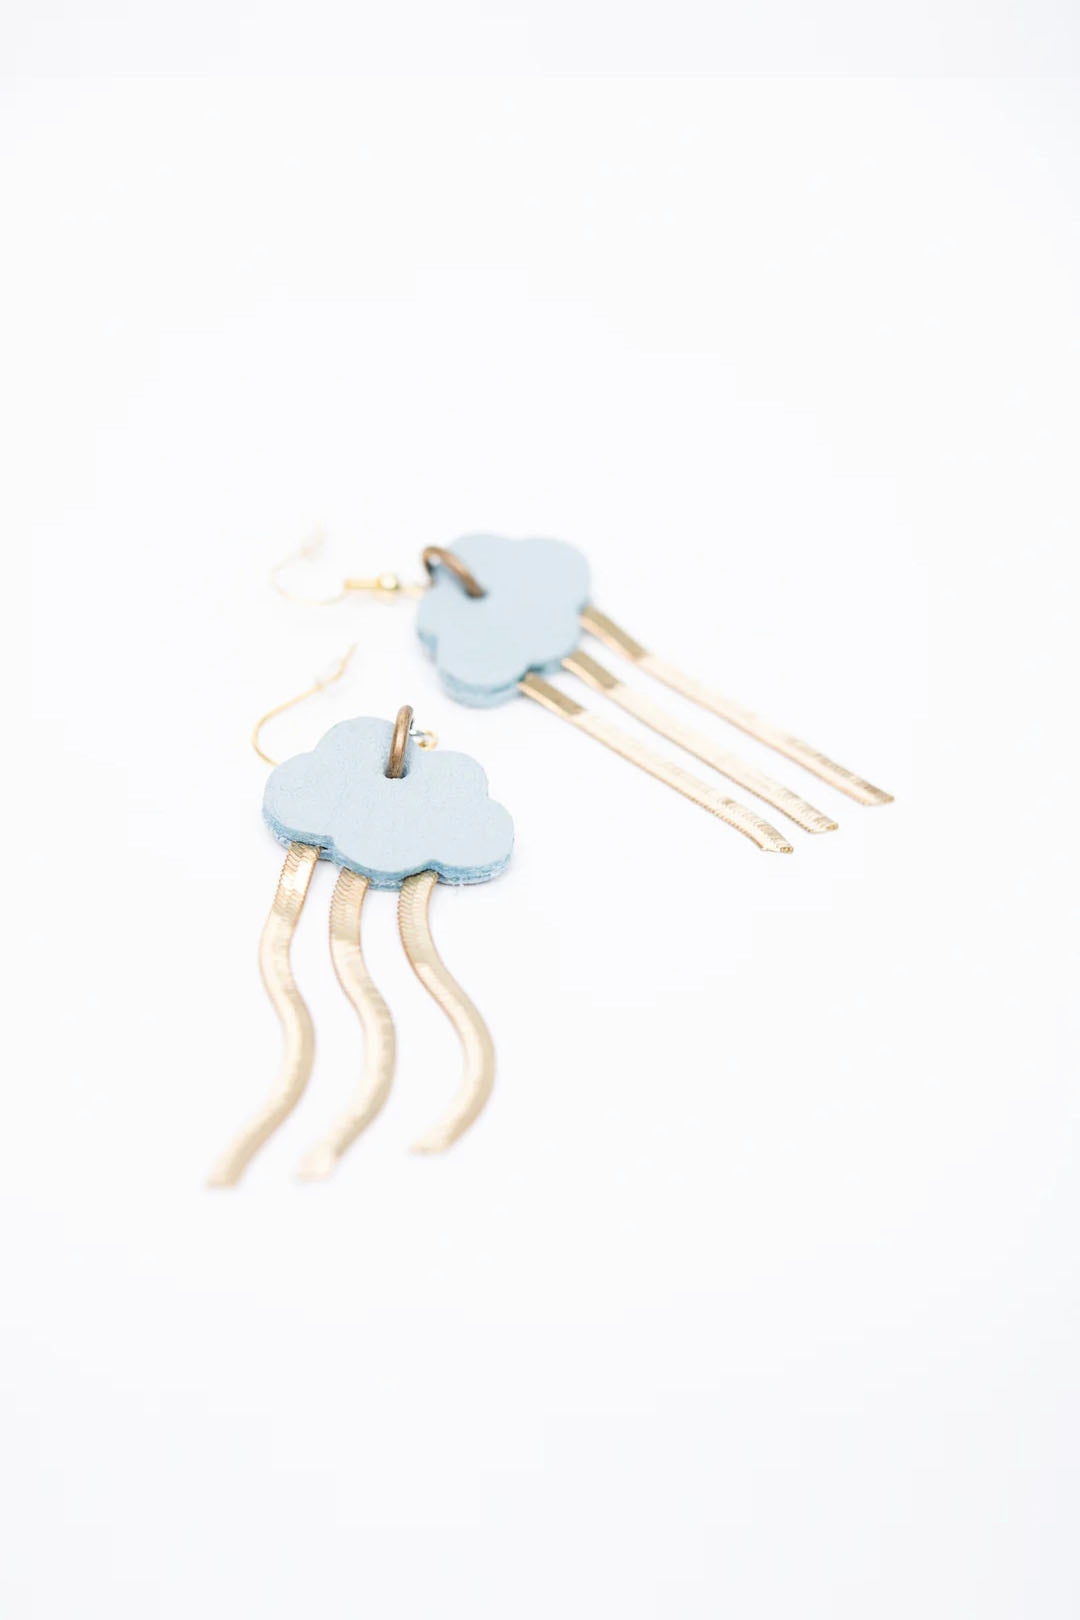 Petite Pluie - Statement leather and brass earrings